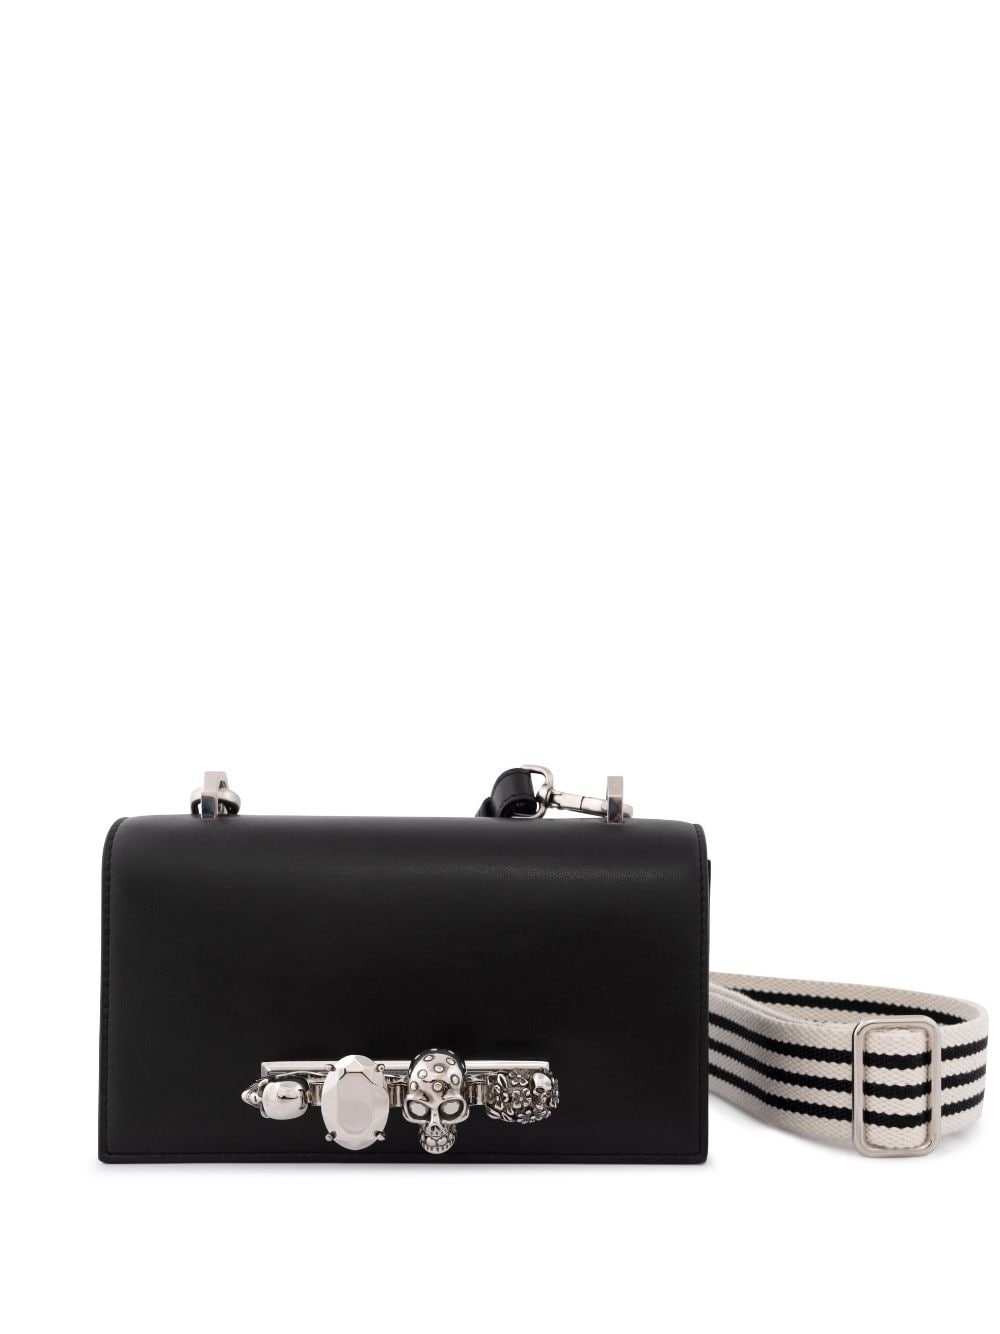 Alexander McQueen Luggage, Briefcases & Trolleys Bags sale - discounted  price | FASHIOLA INDIA